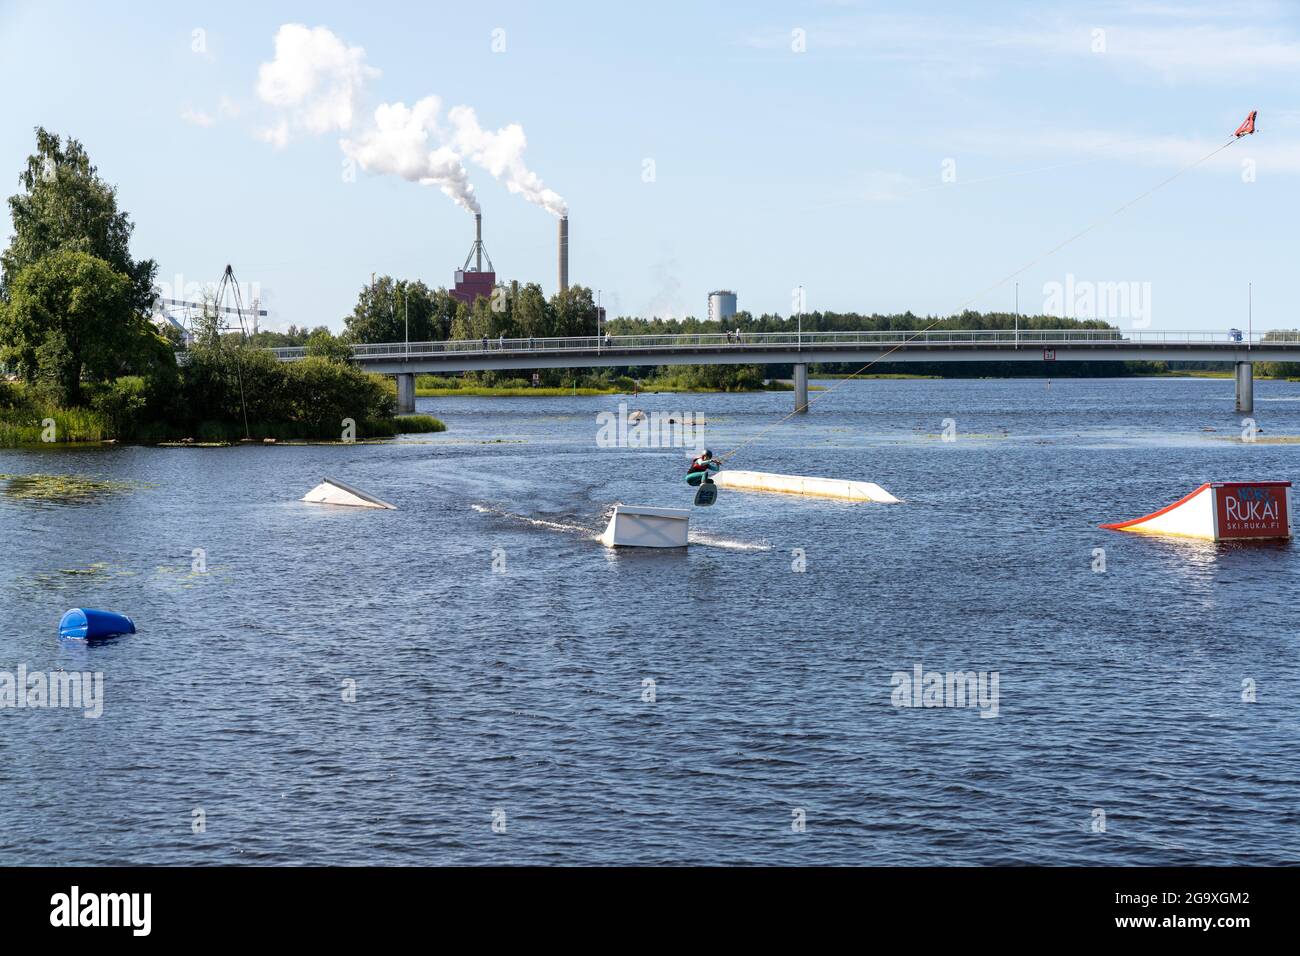 Oulu, Finland - 25 July, 2021: wakeboarder having fun in the wakepark in downtown Oulu on a beautiful summer day Stock Photo